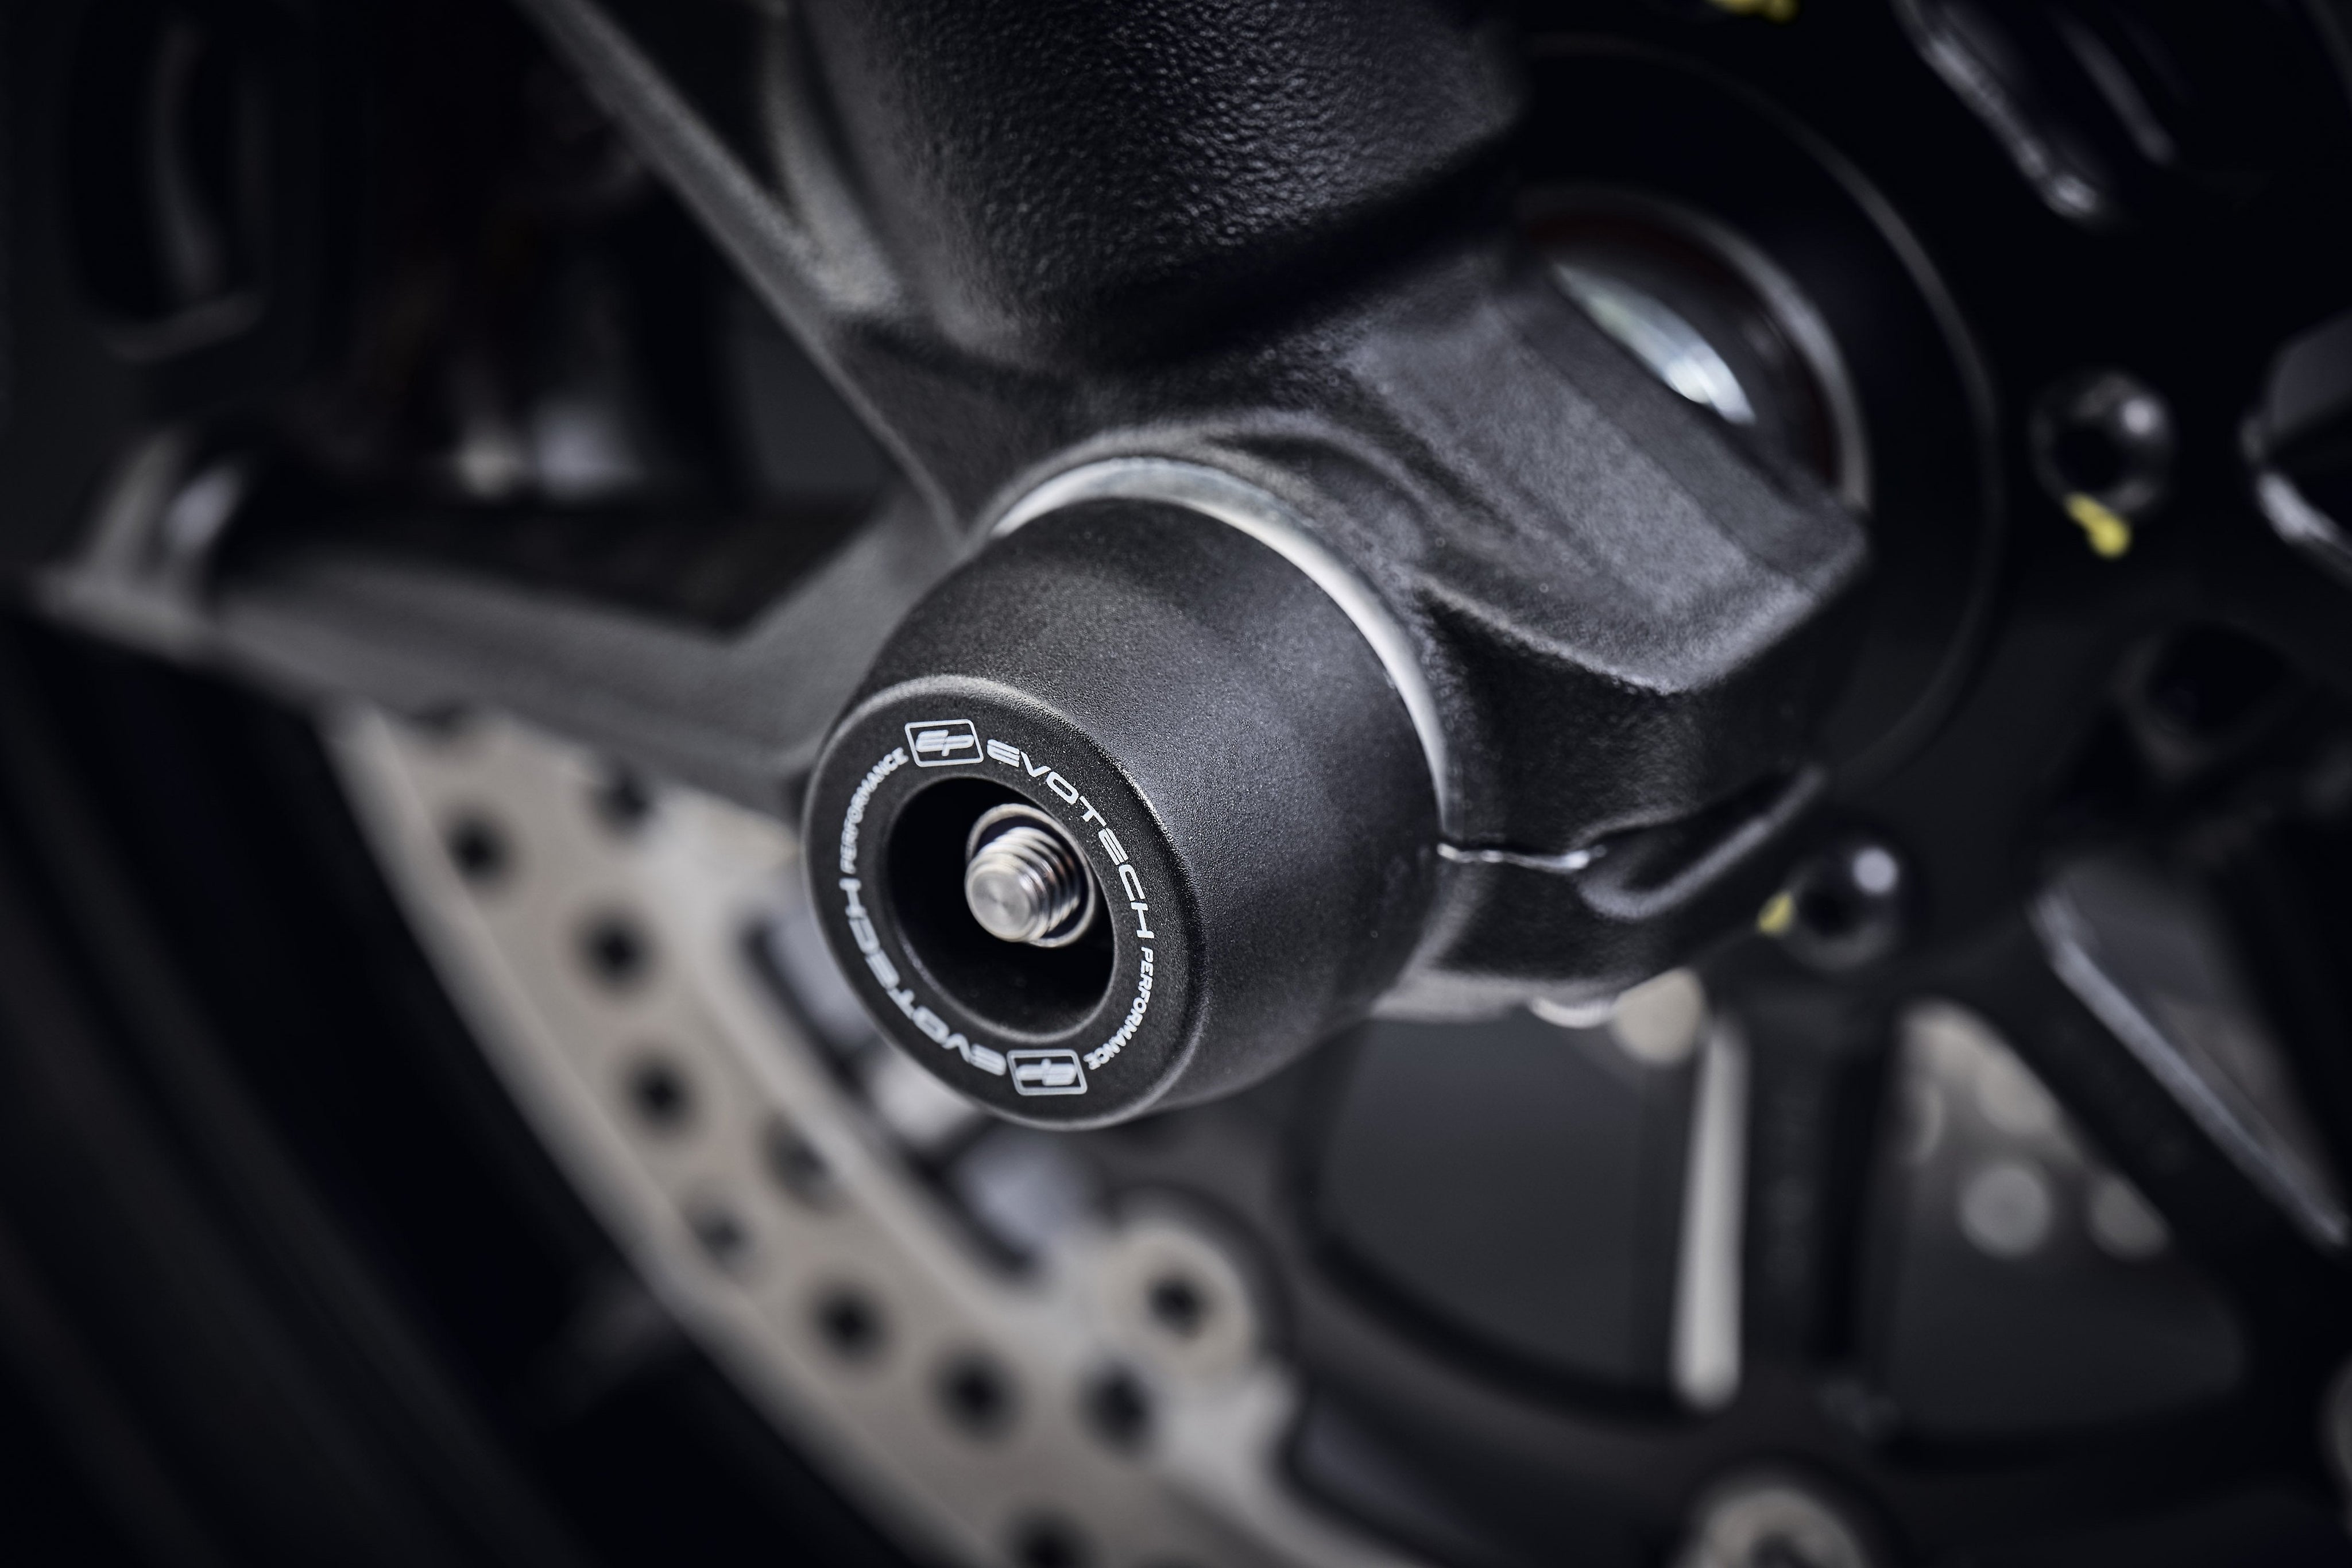 The front wheel of the Ducati Scrambler 1100 Tribute Pro with EP Spindle Bobbins Crash Protection Kit fitted.